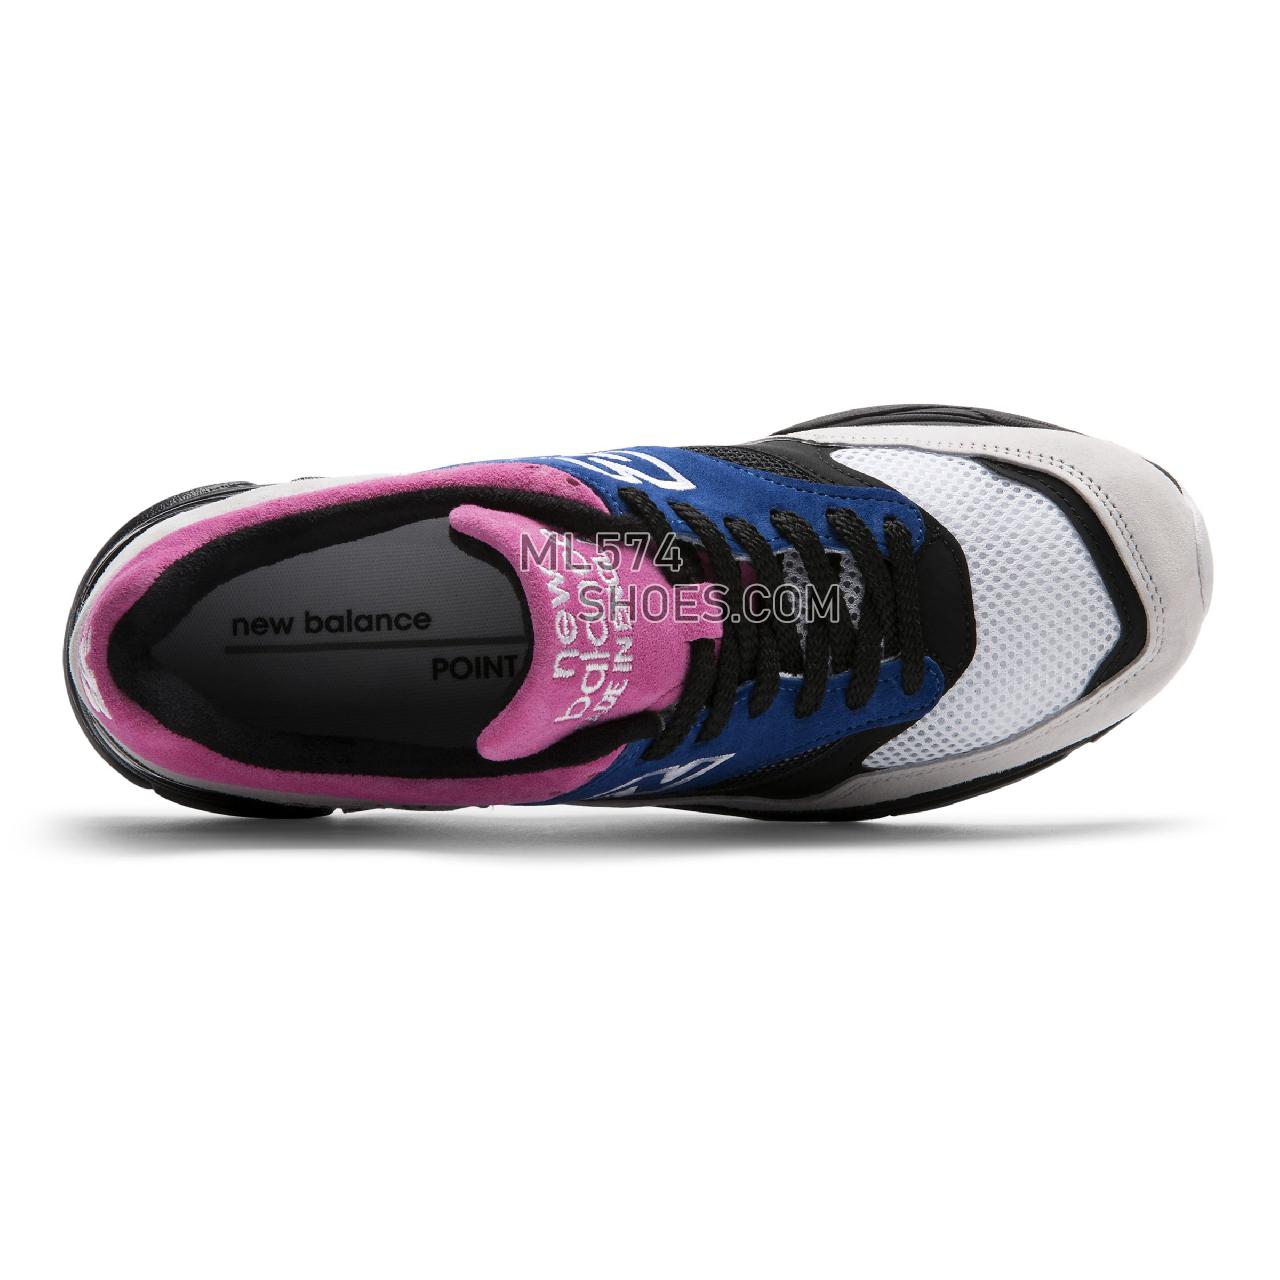 New Balance Made in UK 1500.9 - Men's 1500.9 Made in UK - Pink with Blue and Black - M15009SC